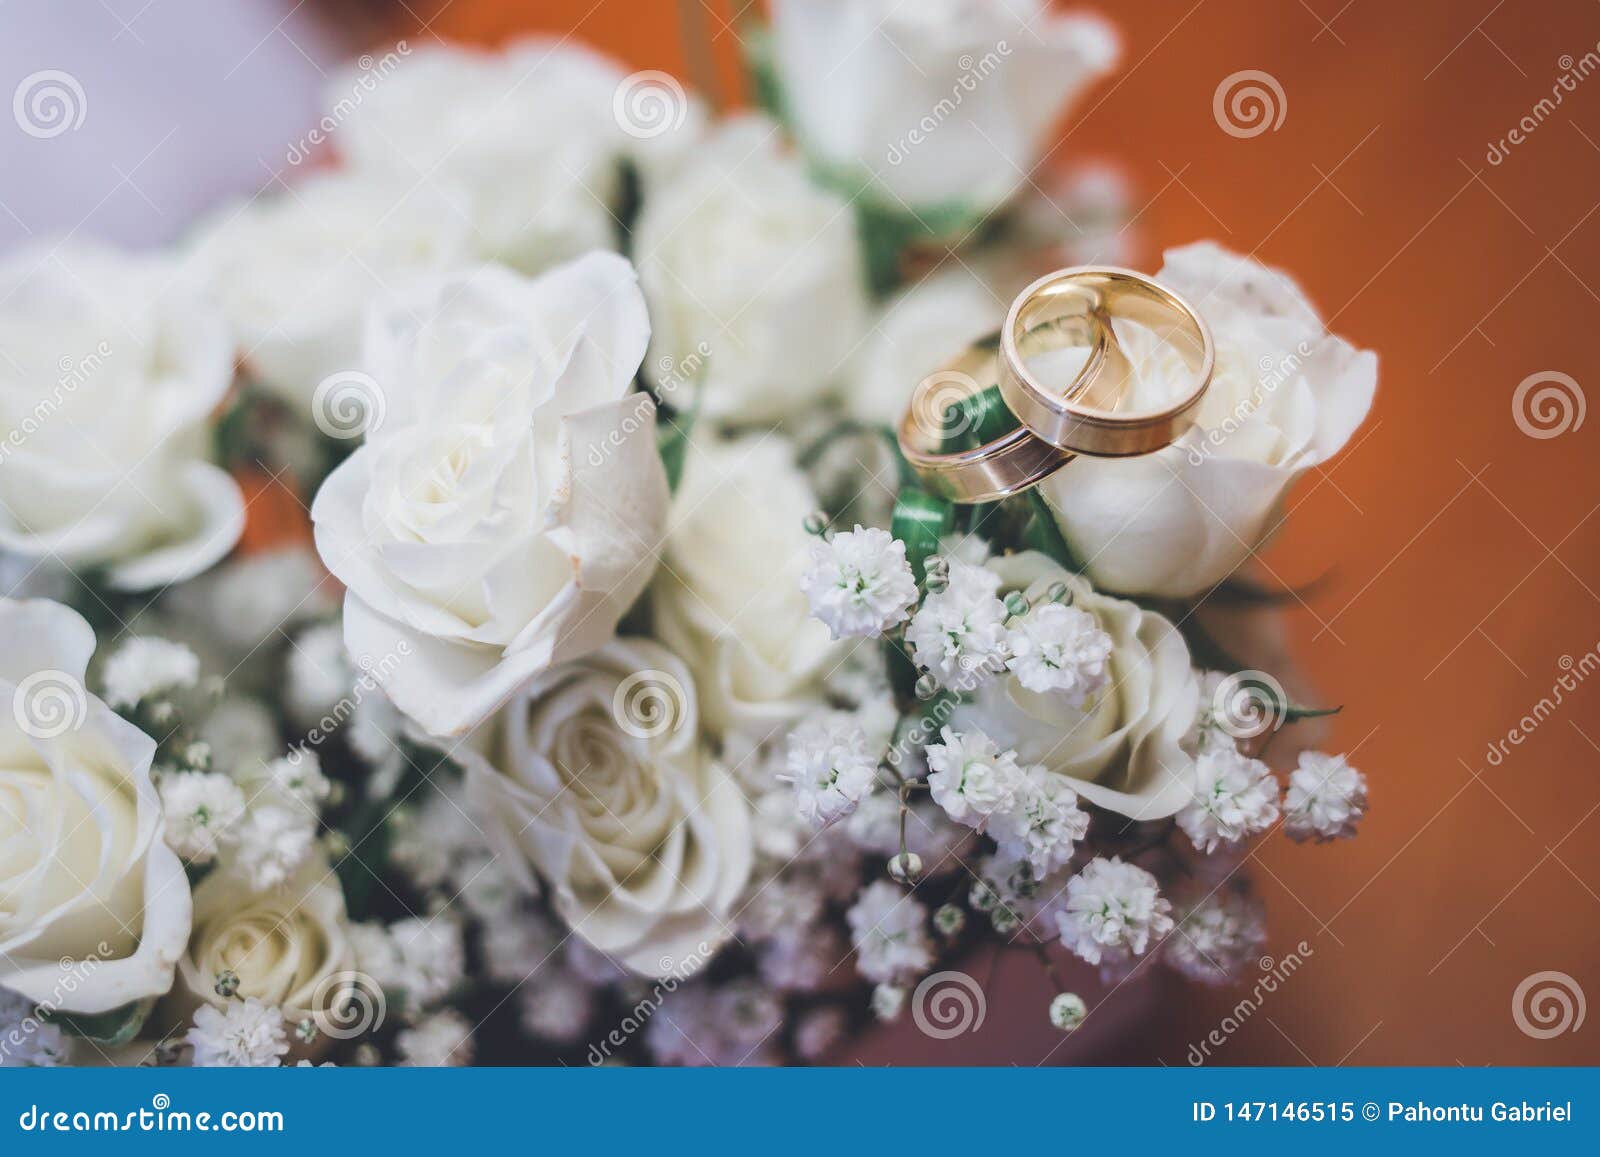 Wedding Rings on Beautiful White Flowers Bouquet. Copy Space. Stock ...